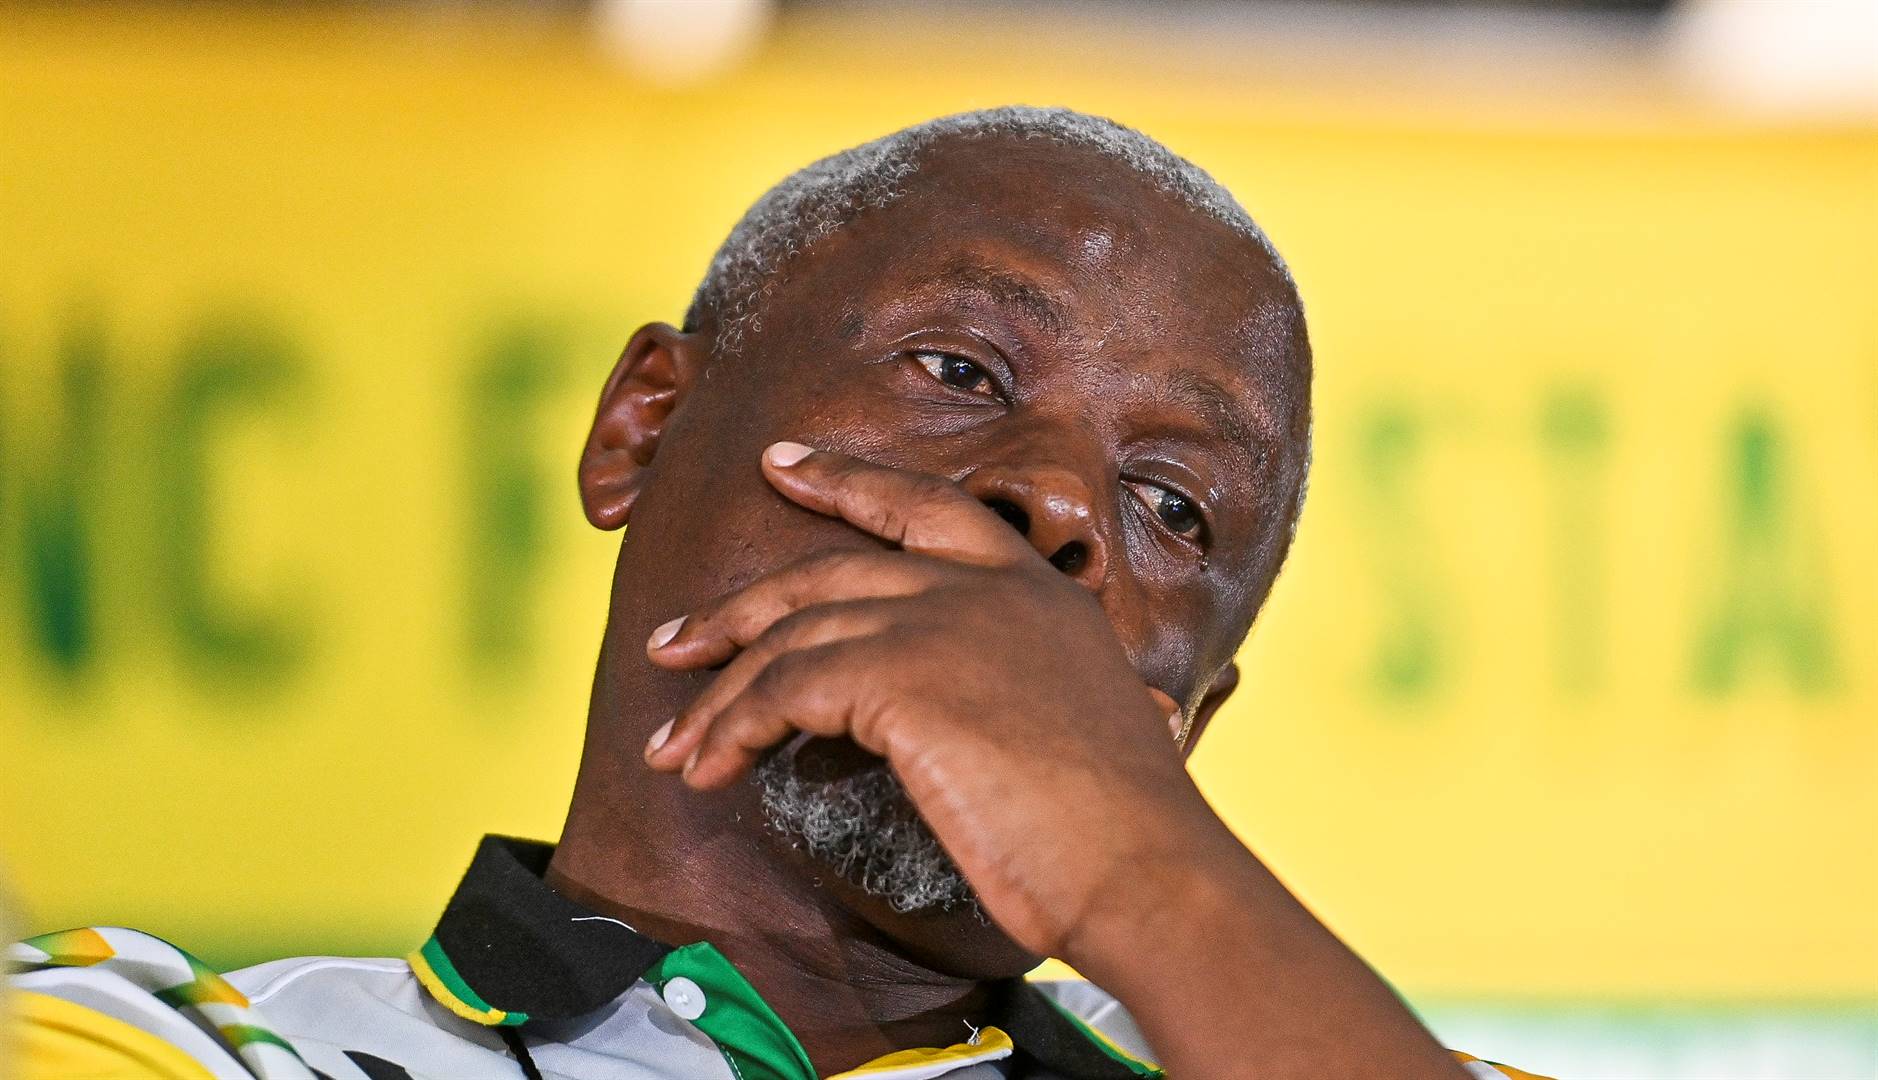 Mxolisi Dukwana is the ANC's preferred premier candidate for the Free State.